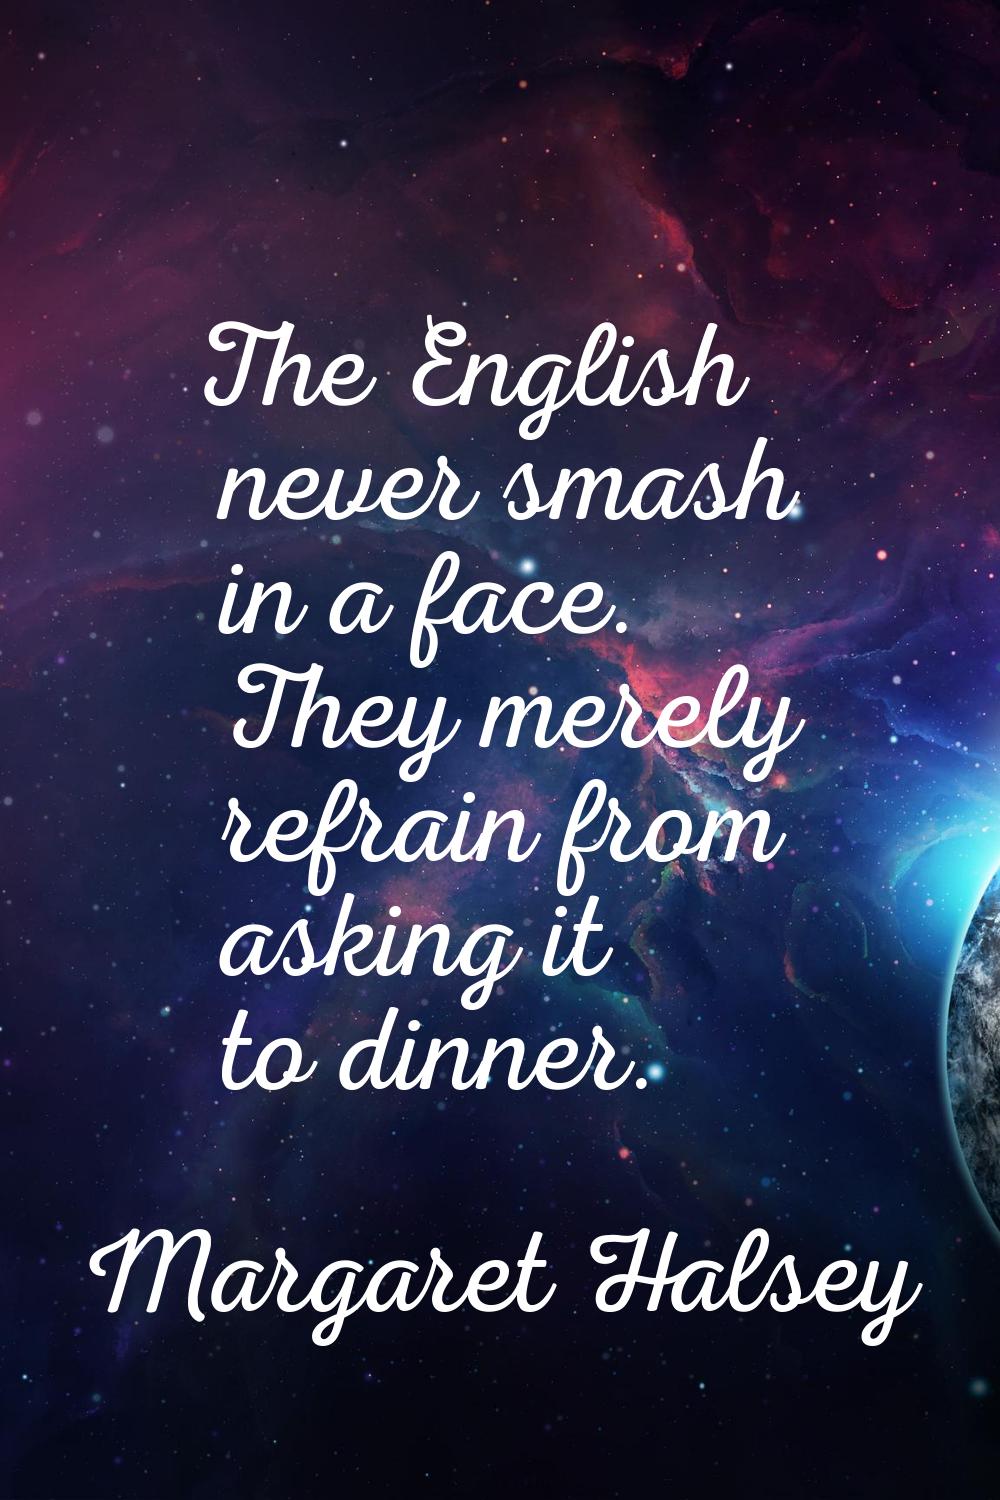 The English never smash in a face. They merely refrain from asking it to dinner.